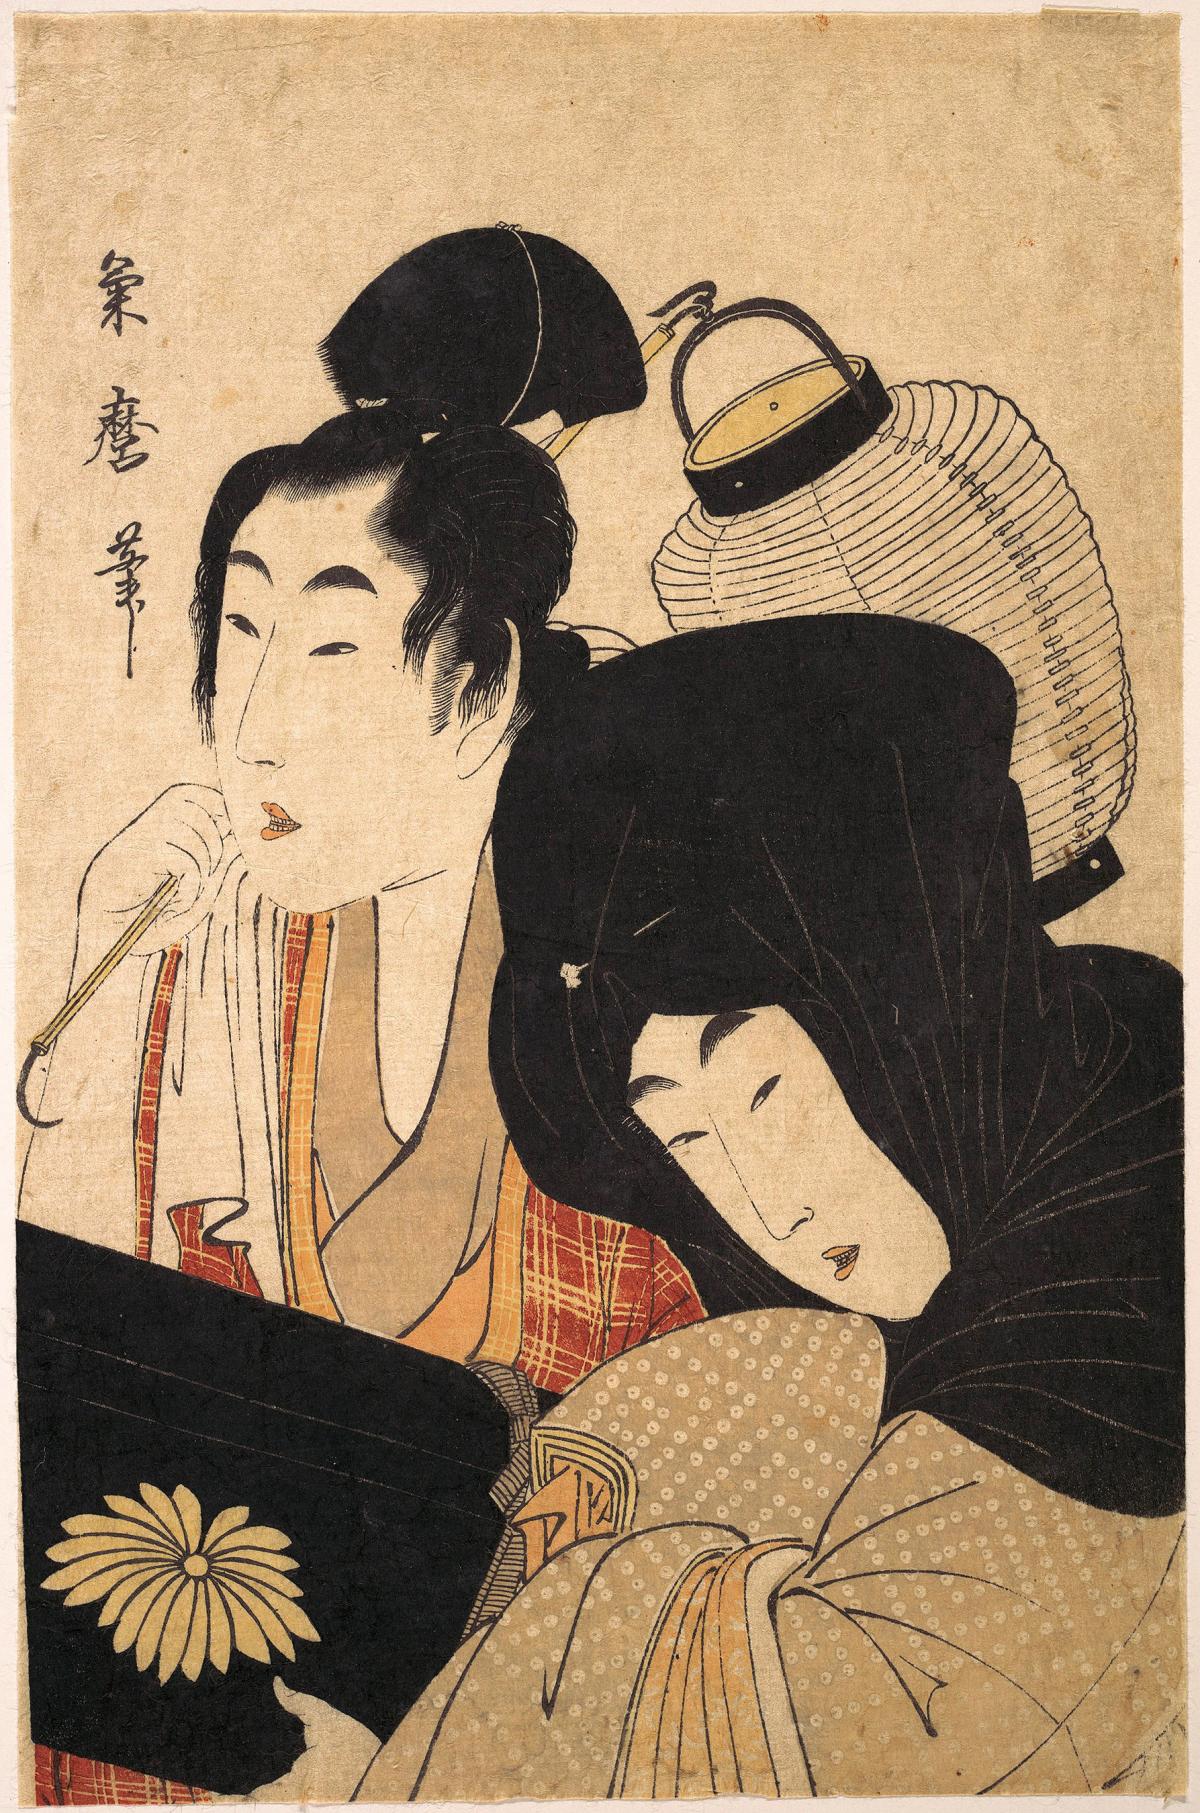 Two Edo-era figures traveling with their heads close, an instrument in the foreground and a lantern behind.